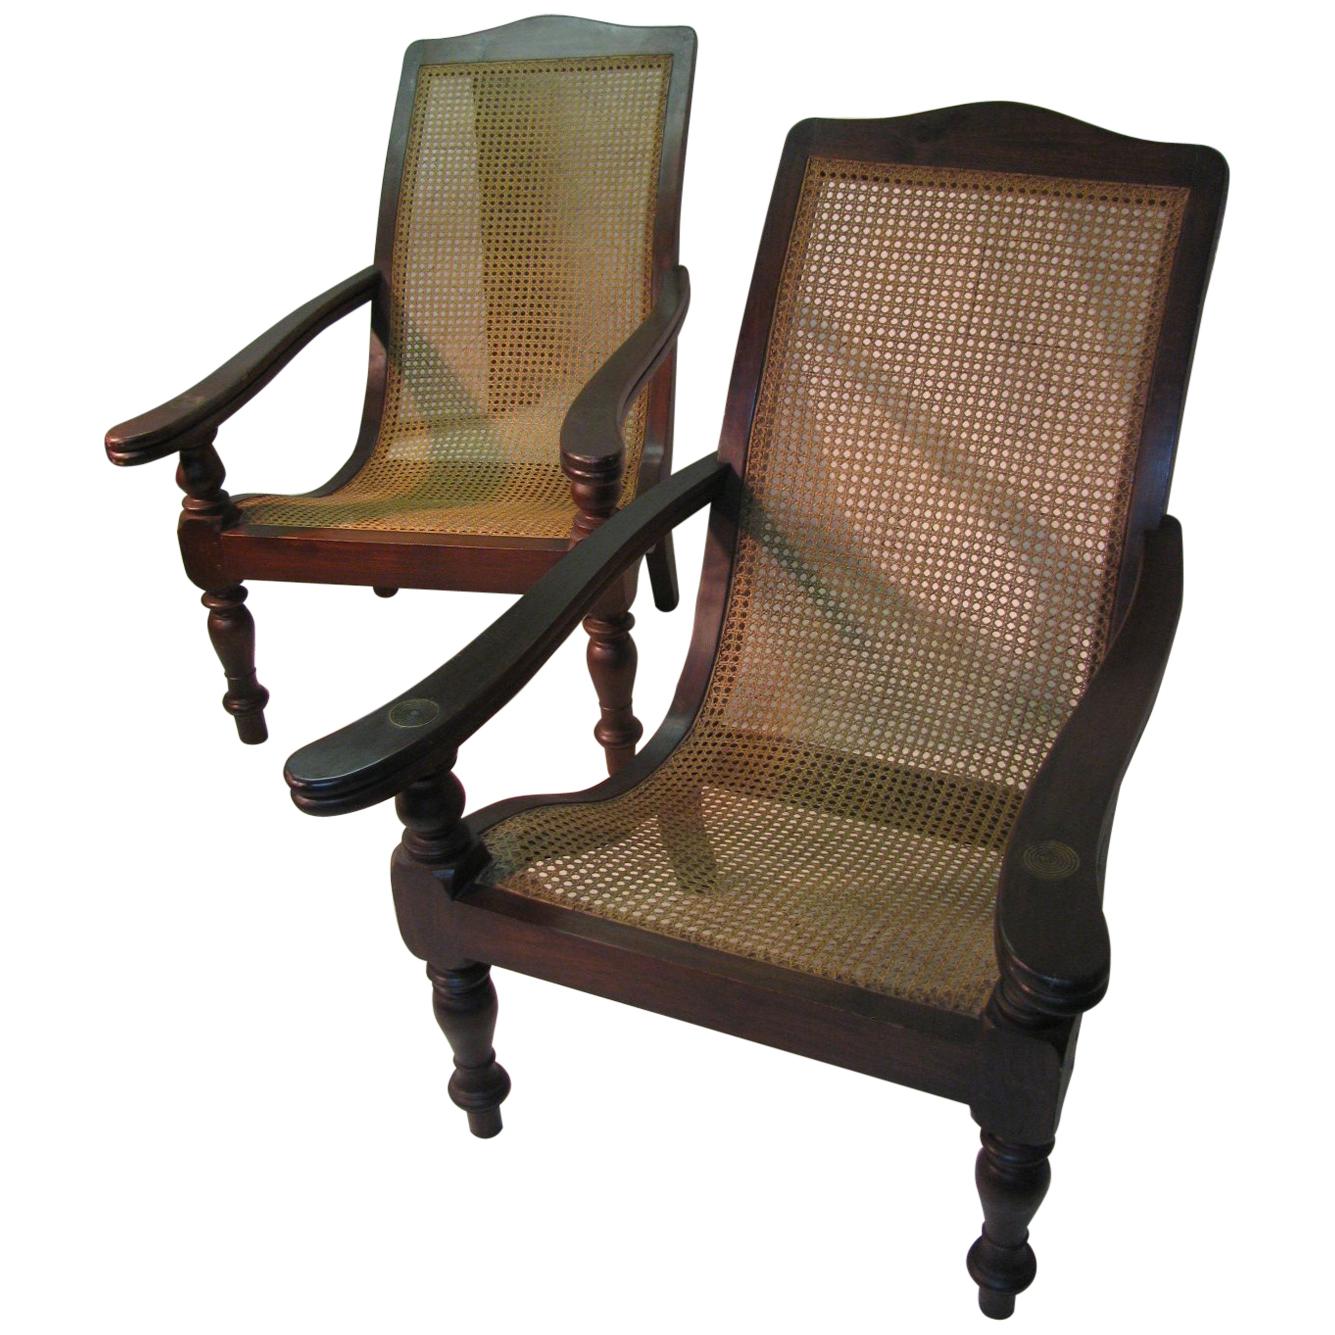 Pair of British Colonial Midcentury Plantation / Lounge Chairs